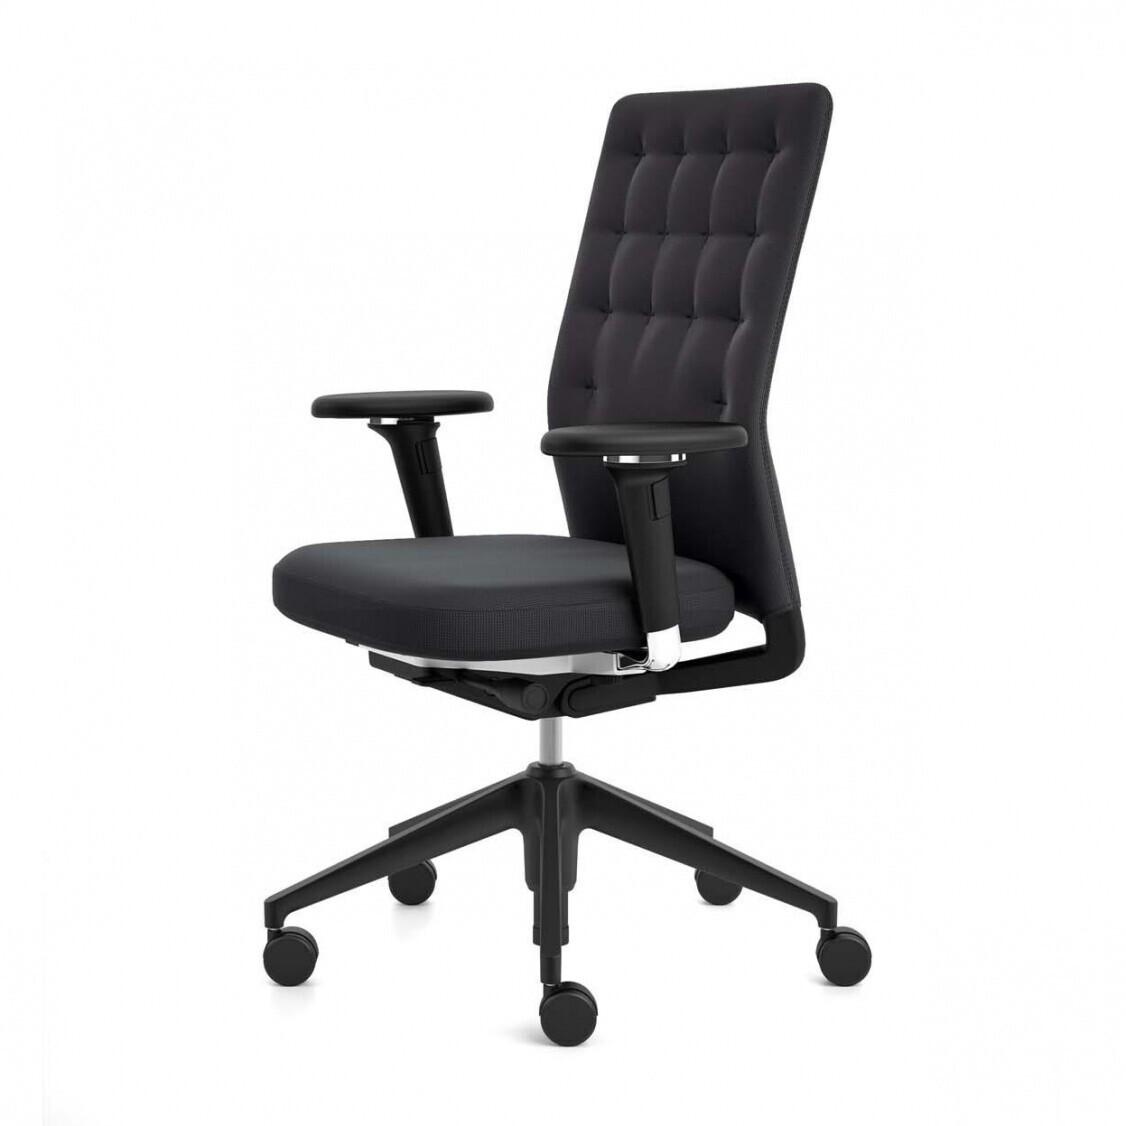 Vitra Id Trim Citterio Office Chair 2d Armrests Ambientedirect